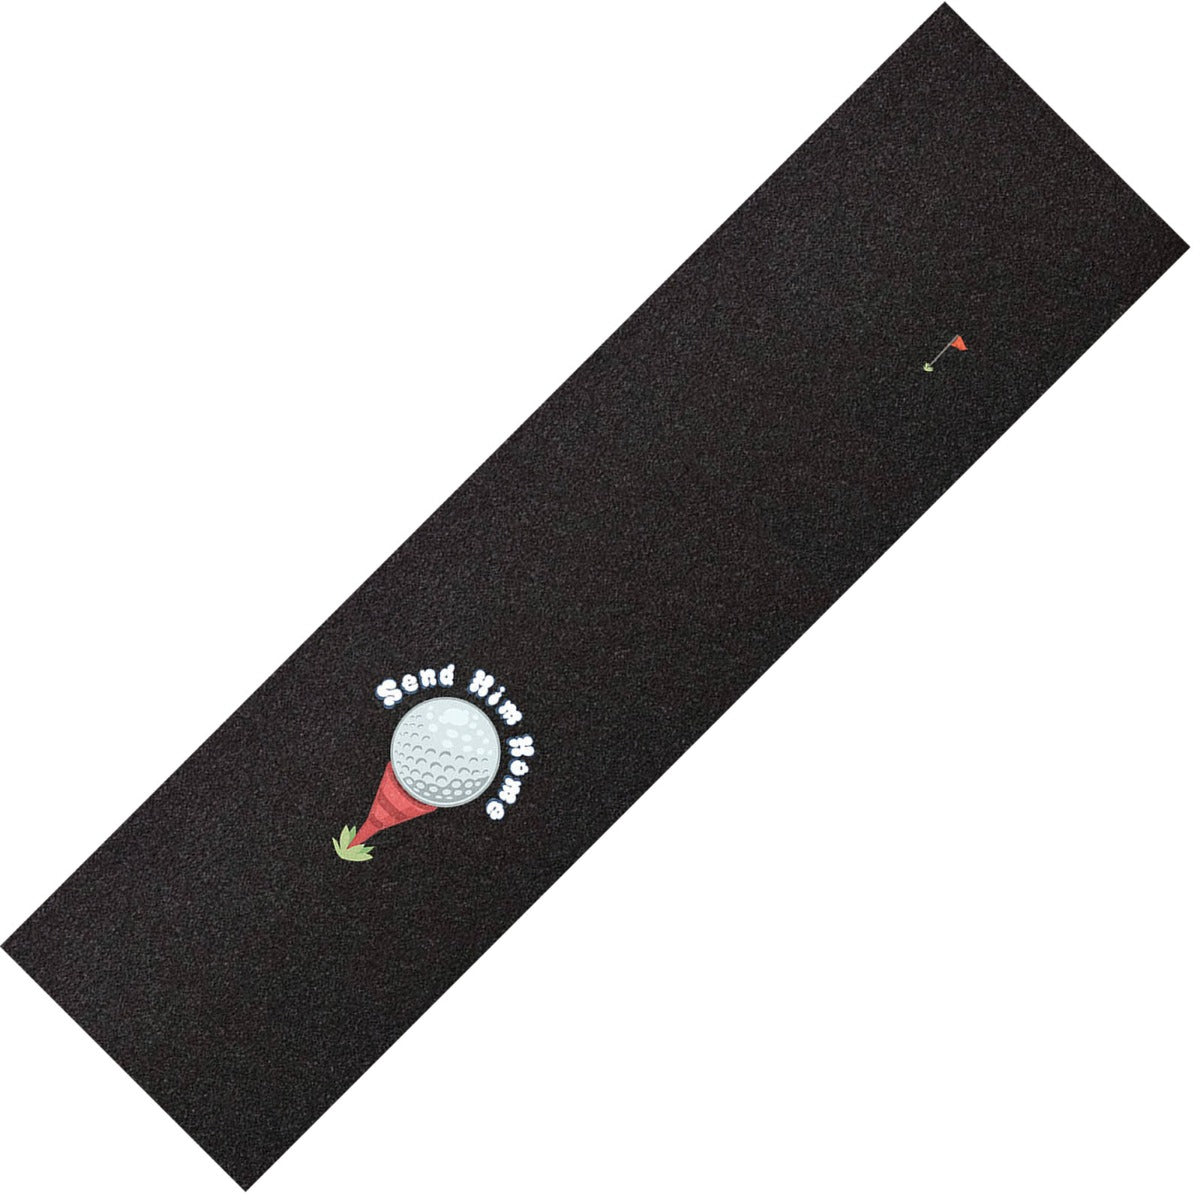 Figz Collection XL Pro Stunt Scooter Griptape - Send Him Home